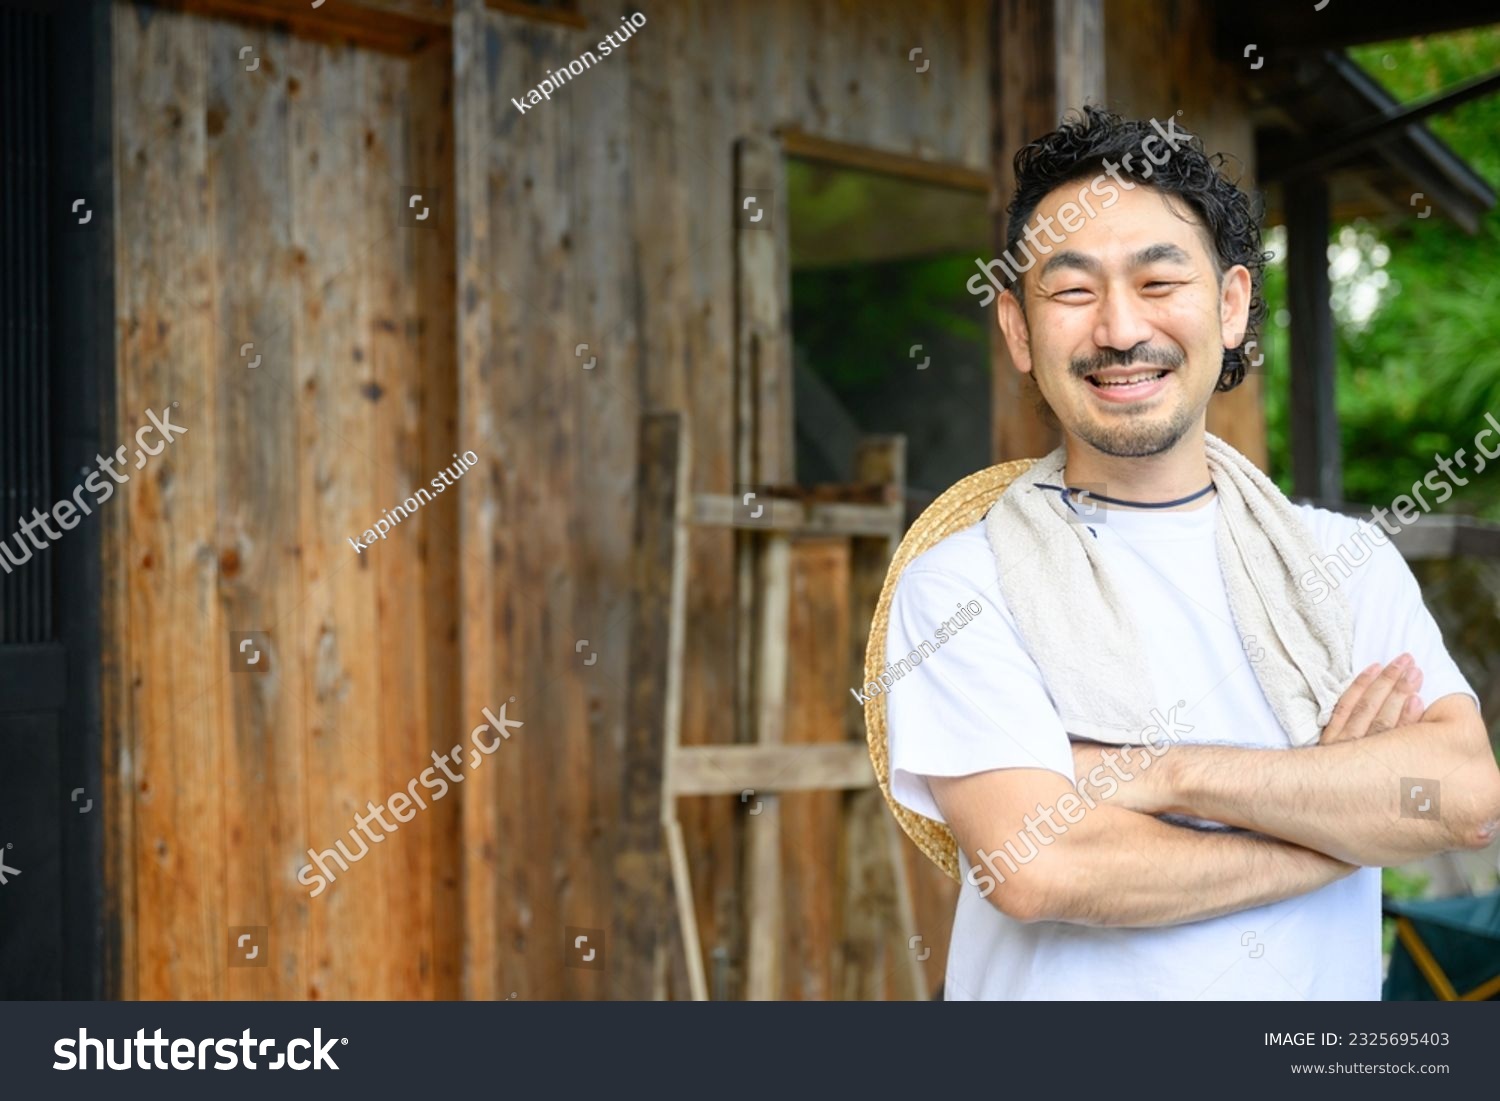 A Japanese farmer stands in the yard of an old house in the Japanese countryside with his arms folded and a smile on his face. The photo shows the upper half of his body, looking at the camera. #2325695403